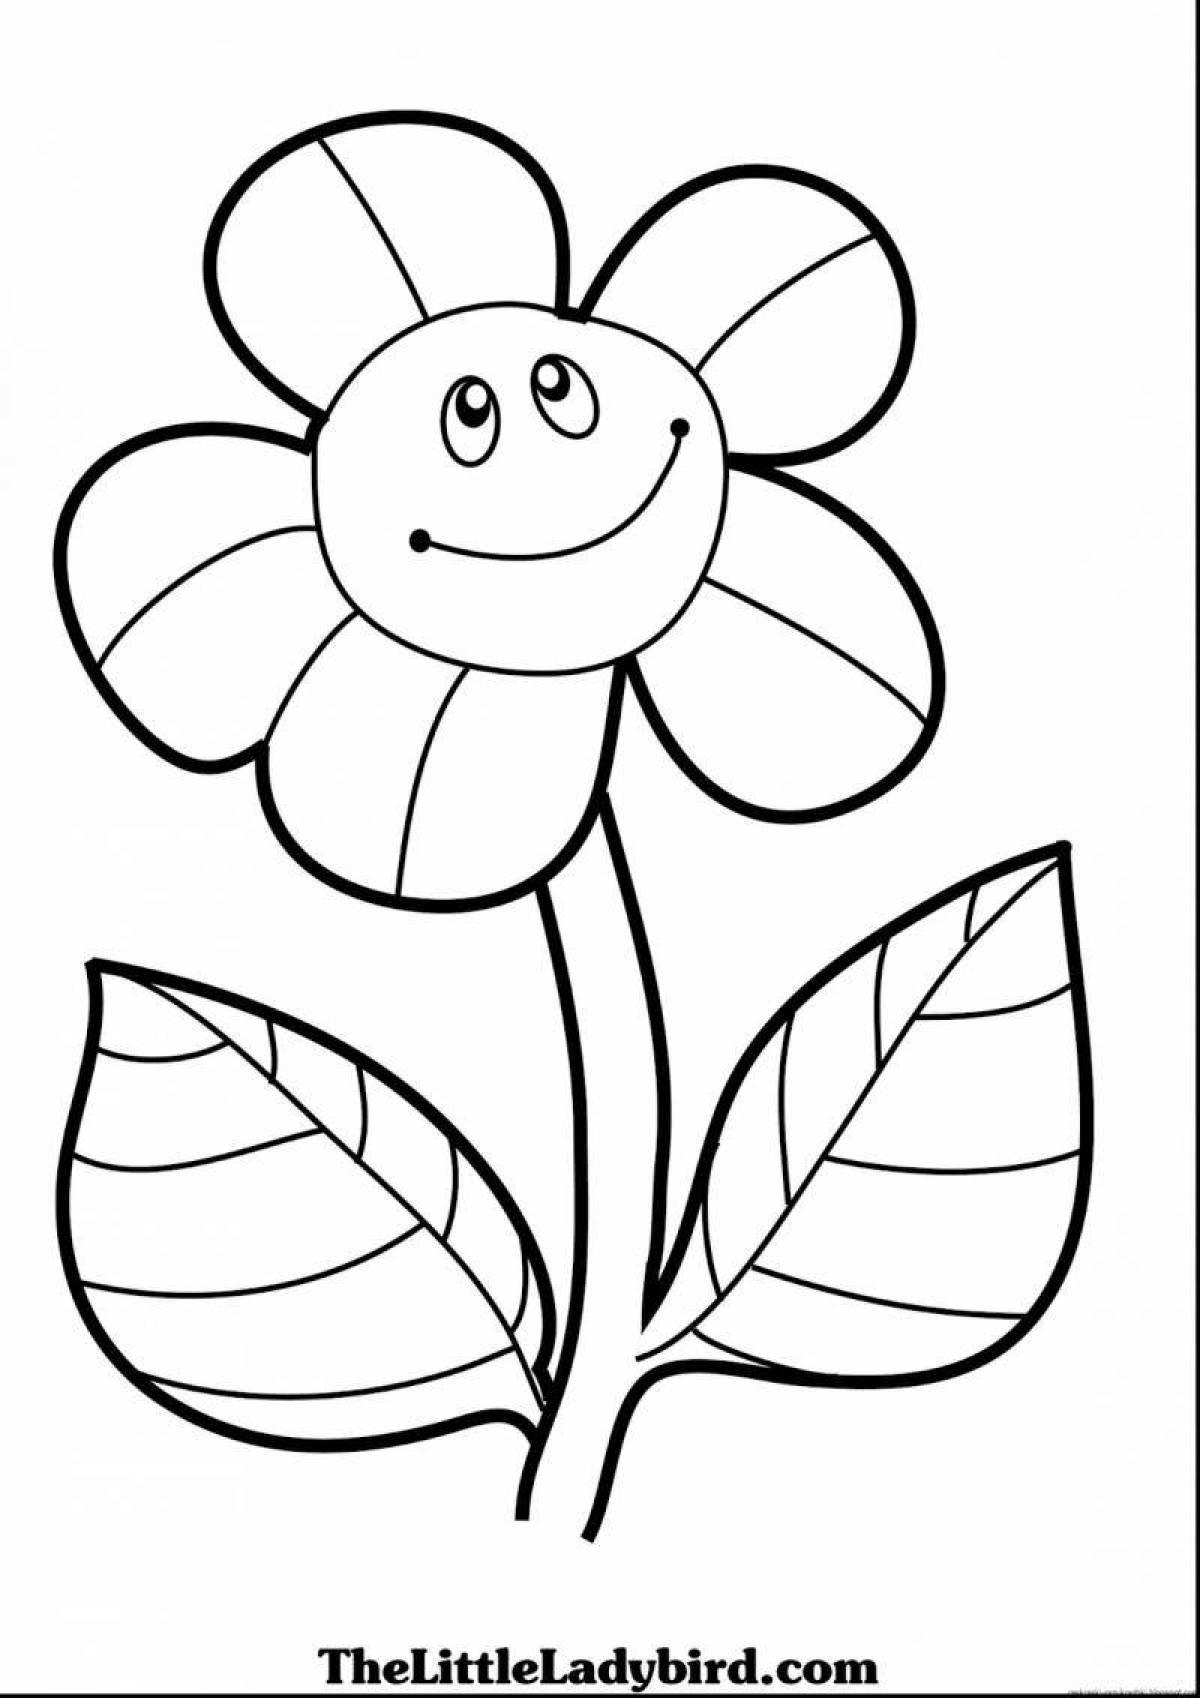 Playful coloring flower picture for kids